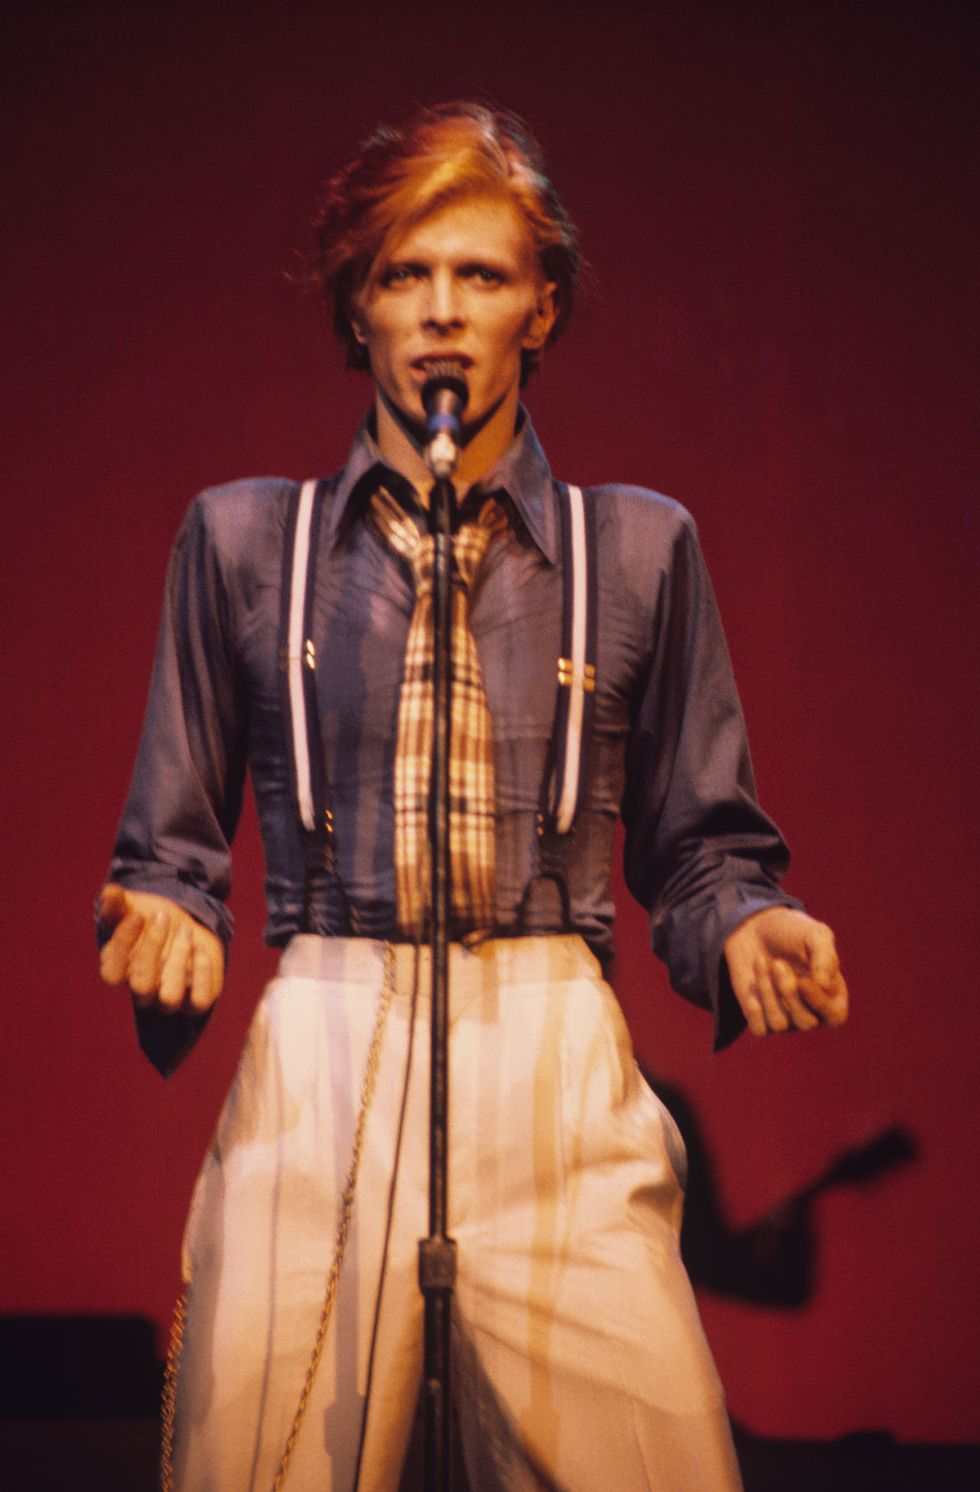 NEW YORK - OCTOBER 01 : Singer David Bowie performs on stage at the Radio City Music Hall in New York City during the Philly Dogs tour in October 1974. (Photo by Steve Morley/Redferns)